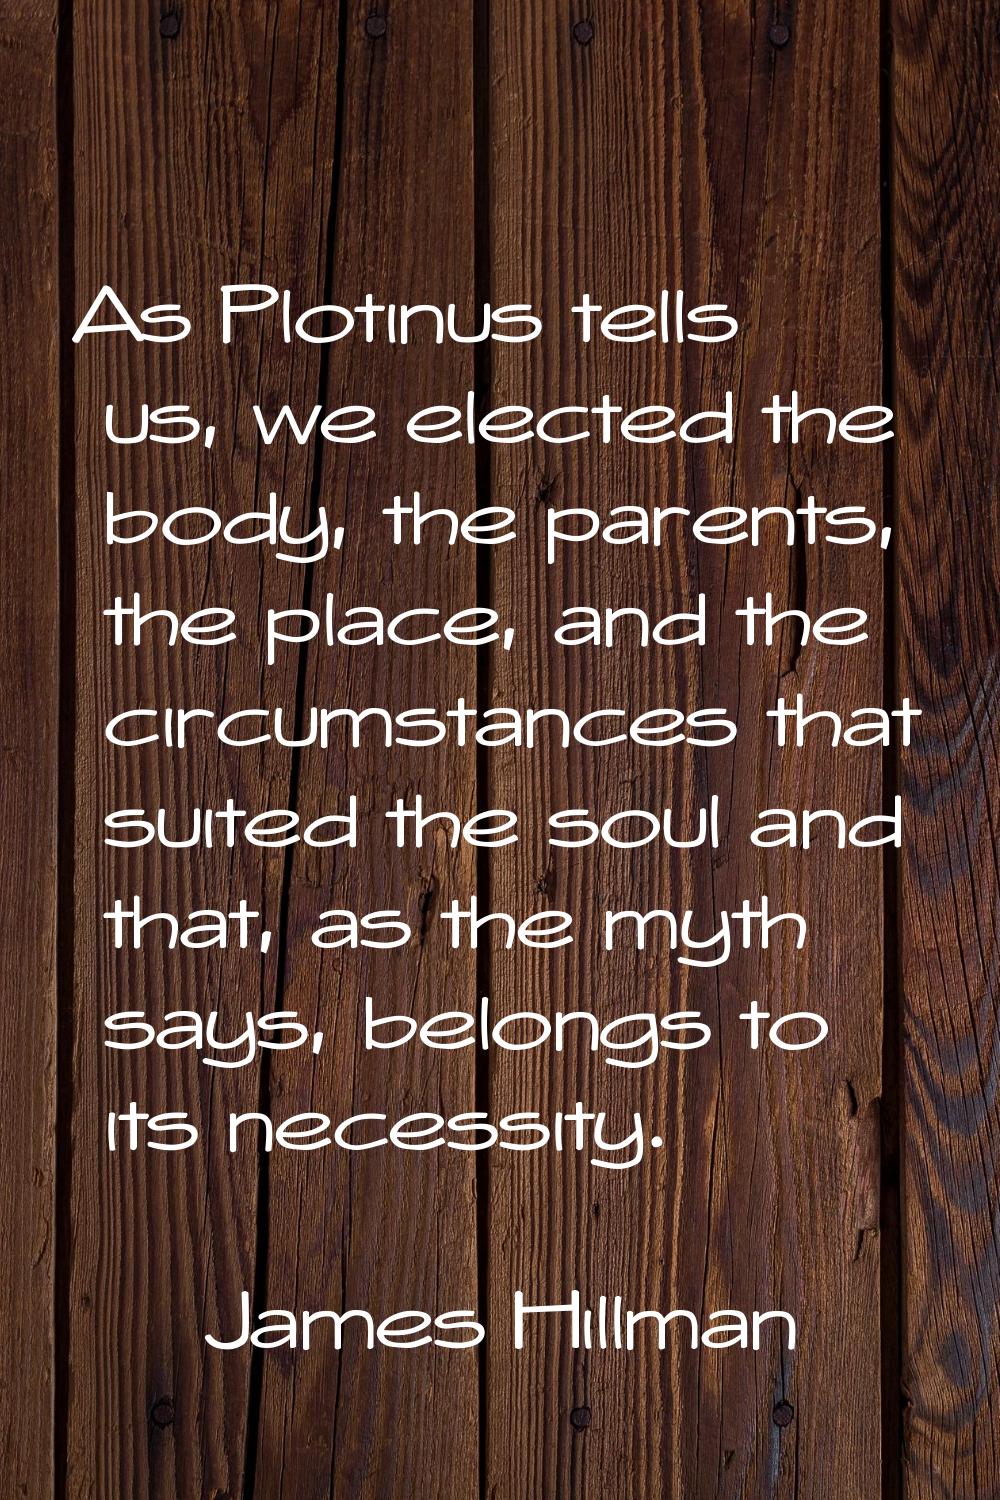 As Plotinus tells us, we elected the body, the parents, the place, and the circumstances that suite